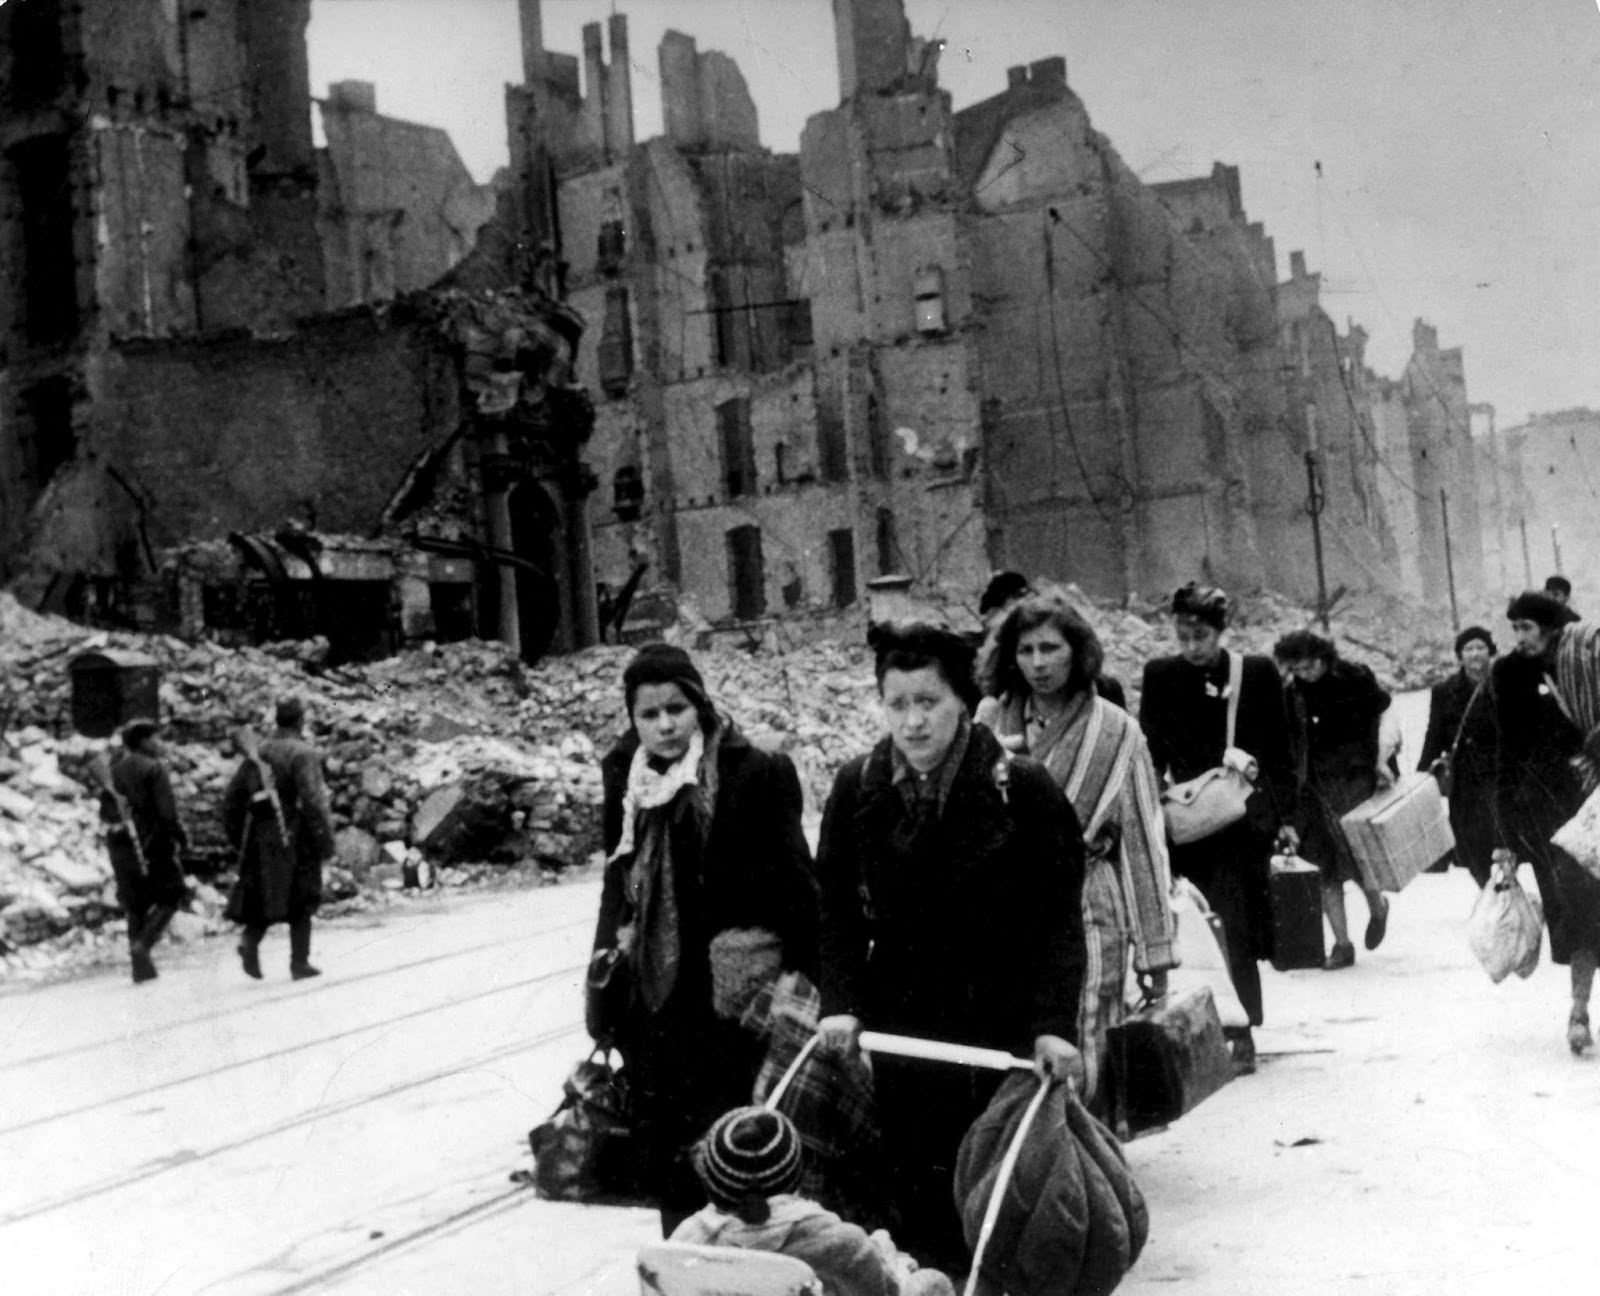 A stream of refugees and people who have been bombed out of their homes moving through destroyed streets in Germany in 1945, after end of war. On the left, two Soviet soldiers can be seen patrolling.